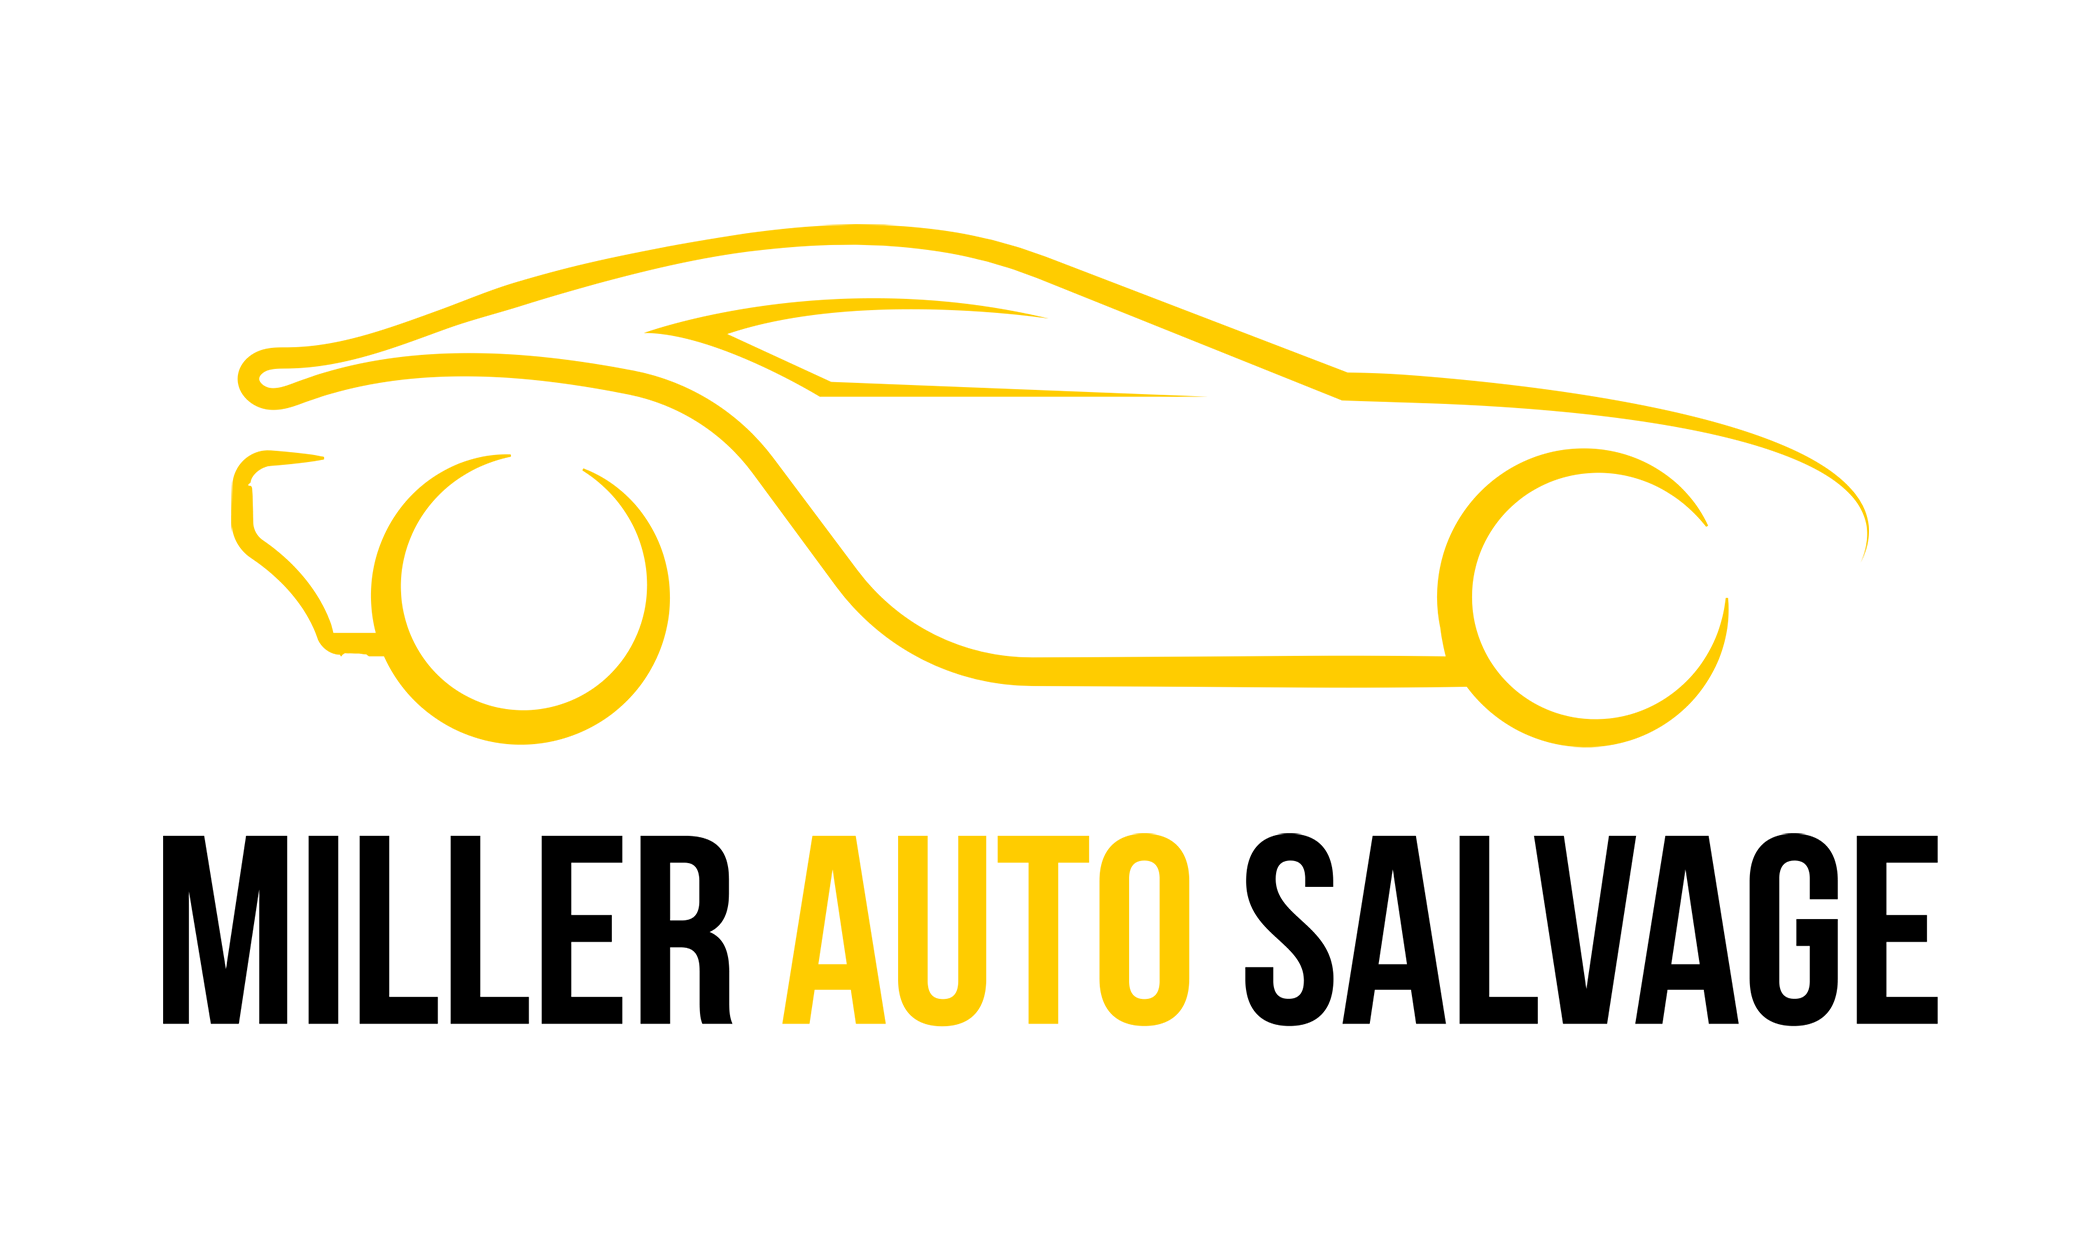 Salvage Logo - Miller Auto Salvage. Chester, PA 19013 531 3104